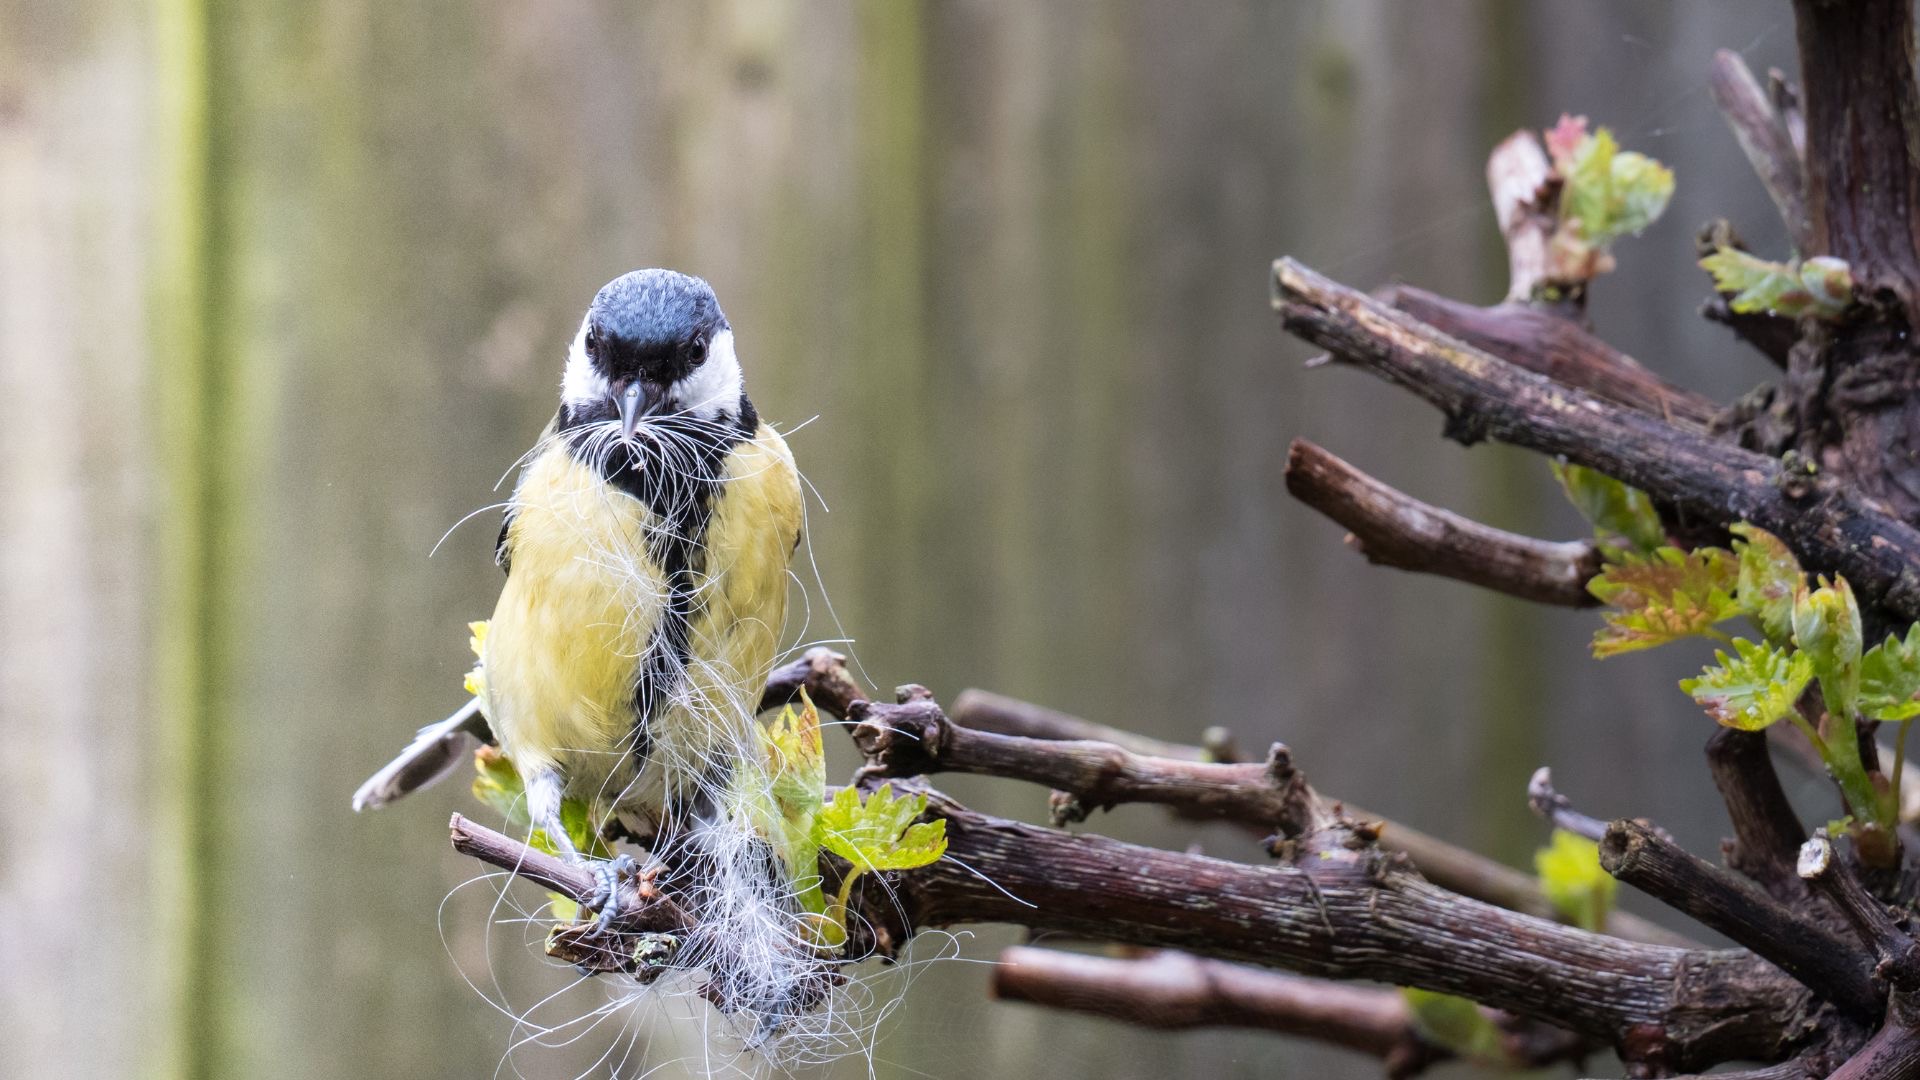 Bird Nesting Season: How Does Bird Nesting Affect Tree Work in the UK and What You Should Do to Avoid Harming Birds?